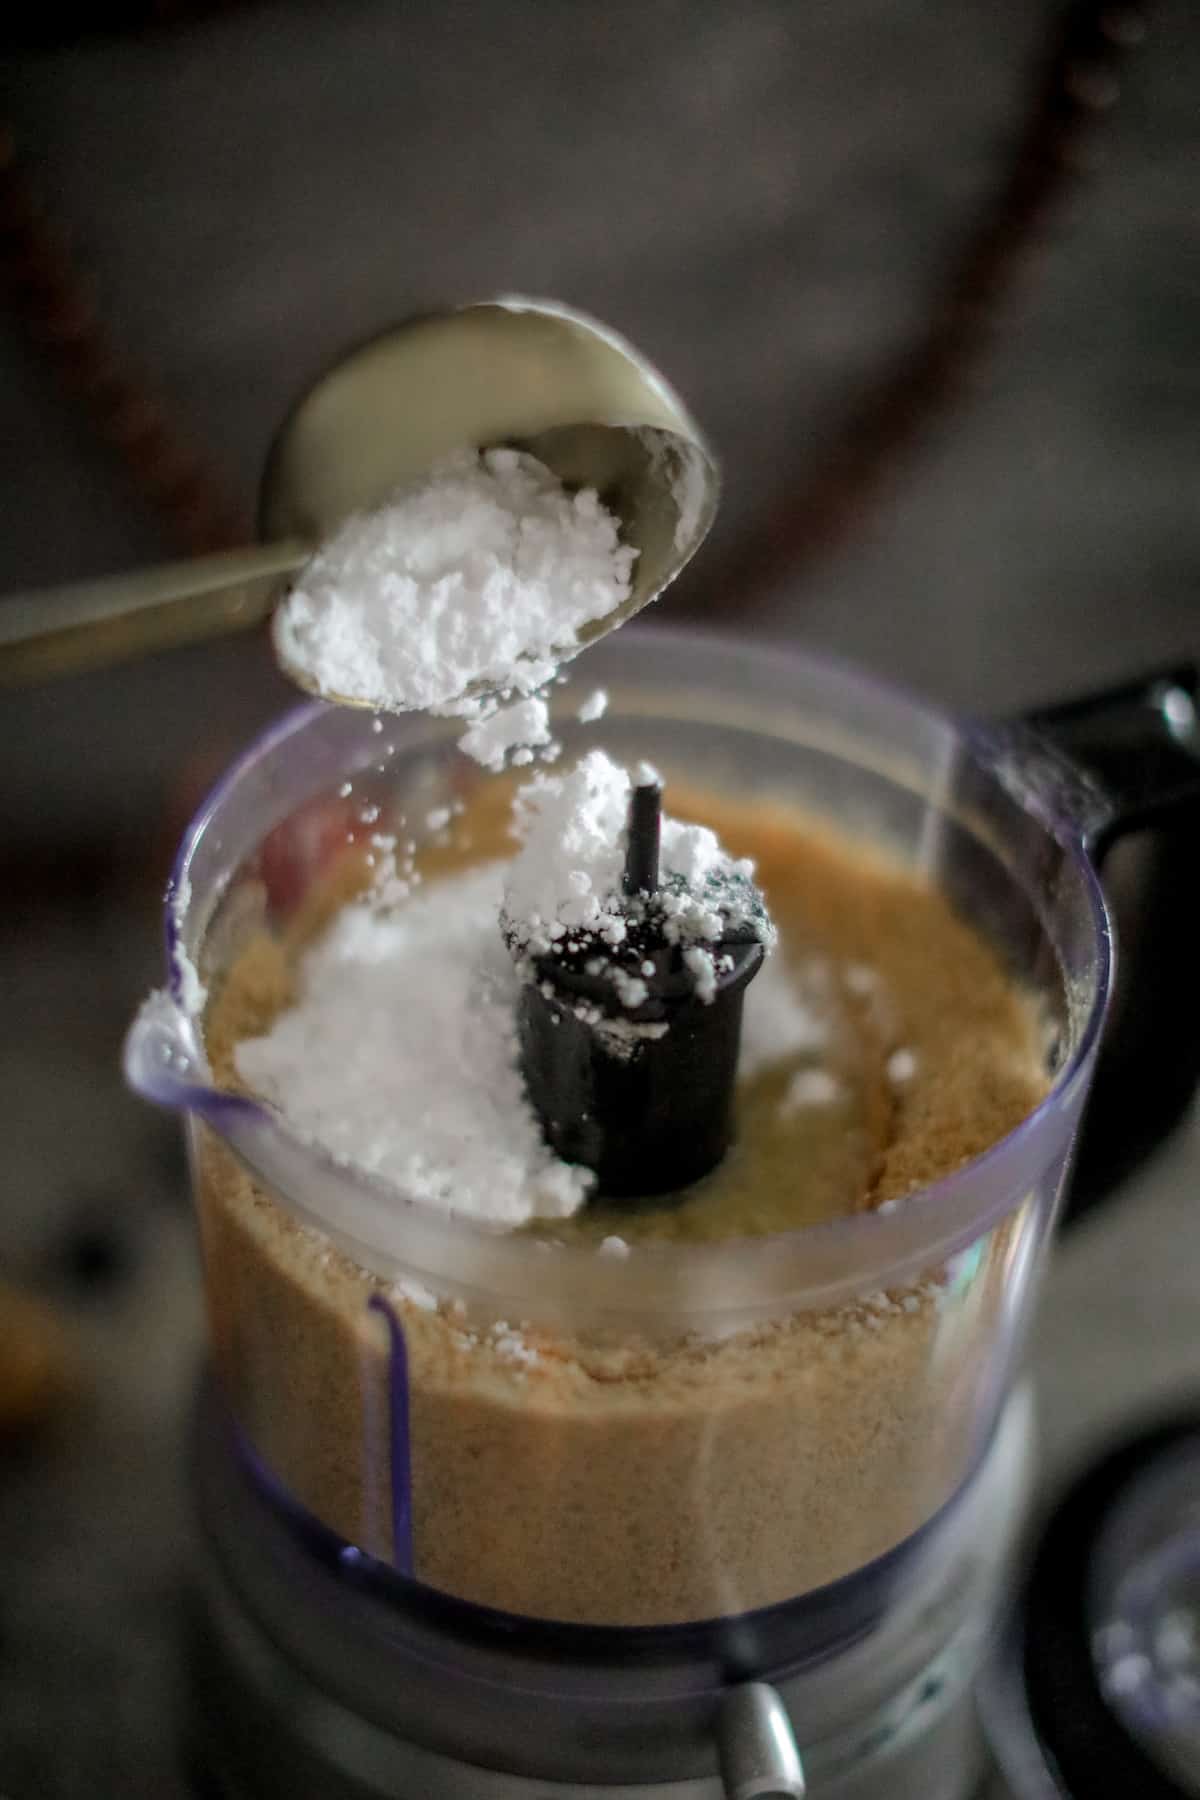 Powdered sugar going into a food processor with graham crackers.